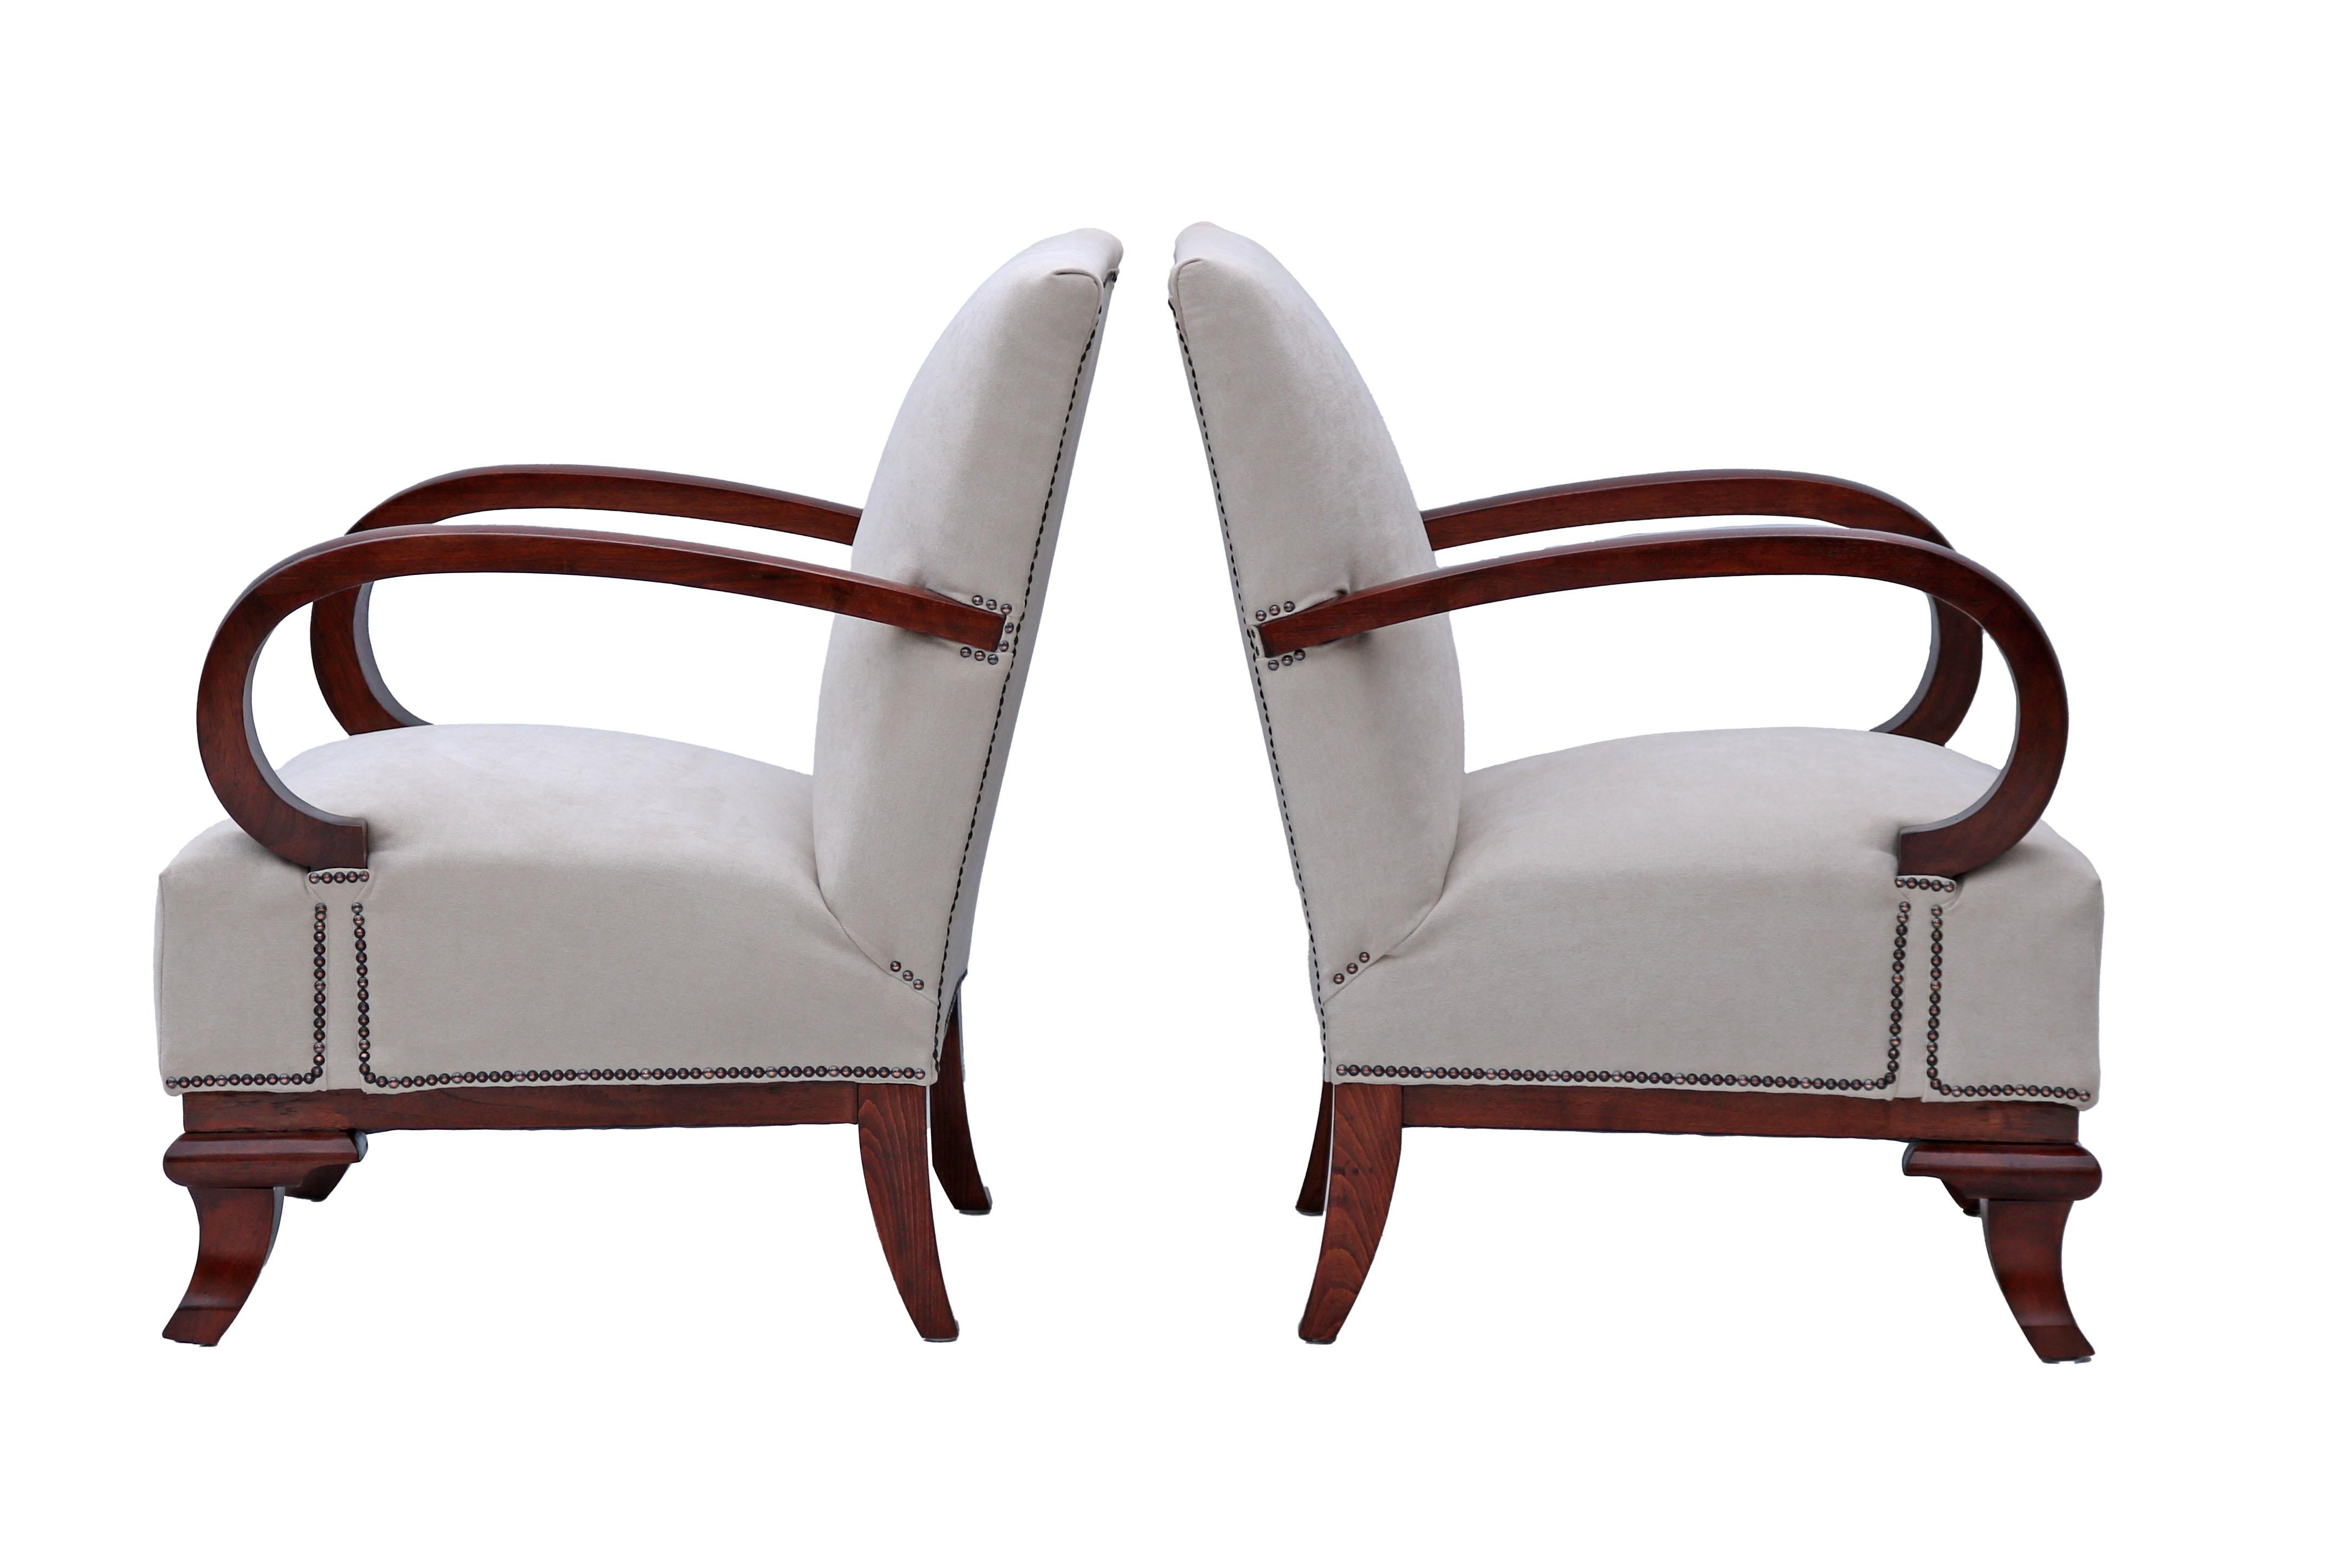 A pair of Art Deco armchairs, fully restored, designed by Lajos Kozma. These armchairs provide a very comfortable seating. Their clean and elegant look will uplift your room.